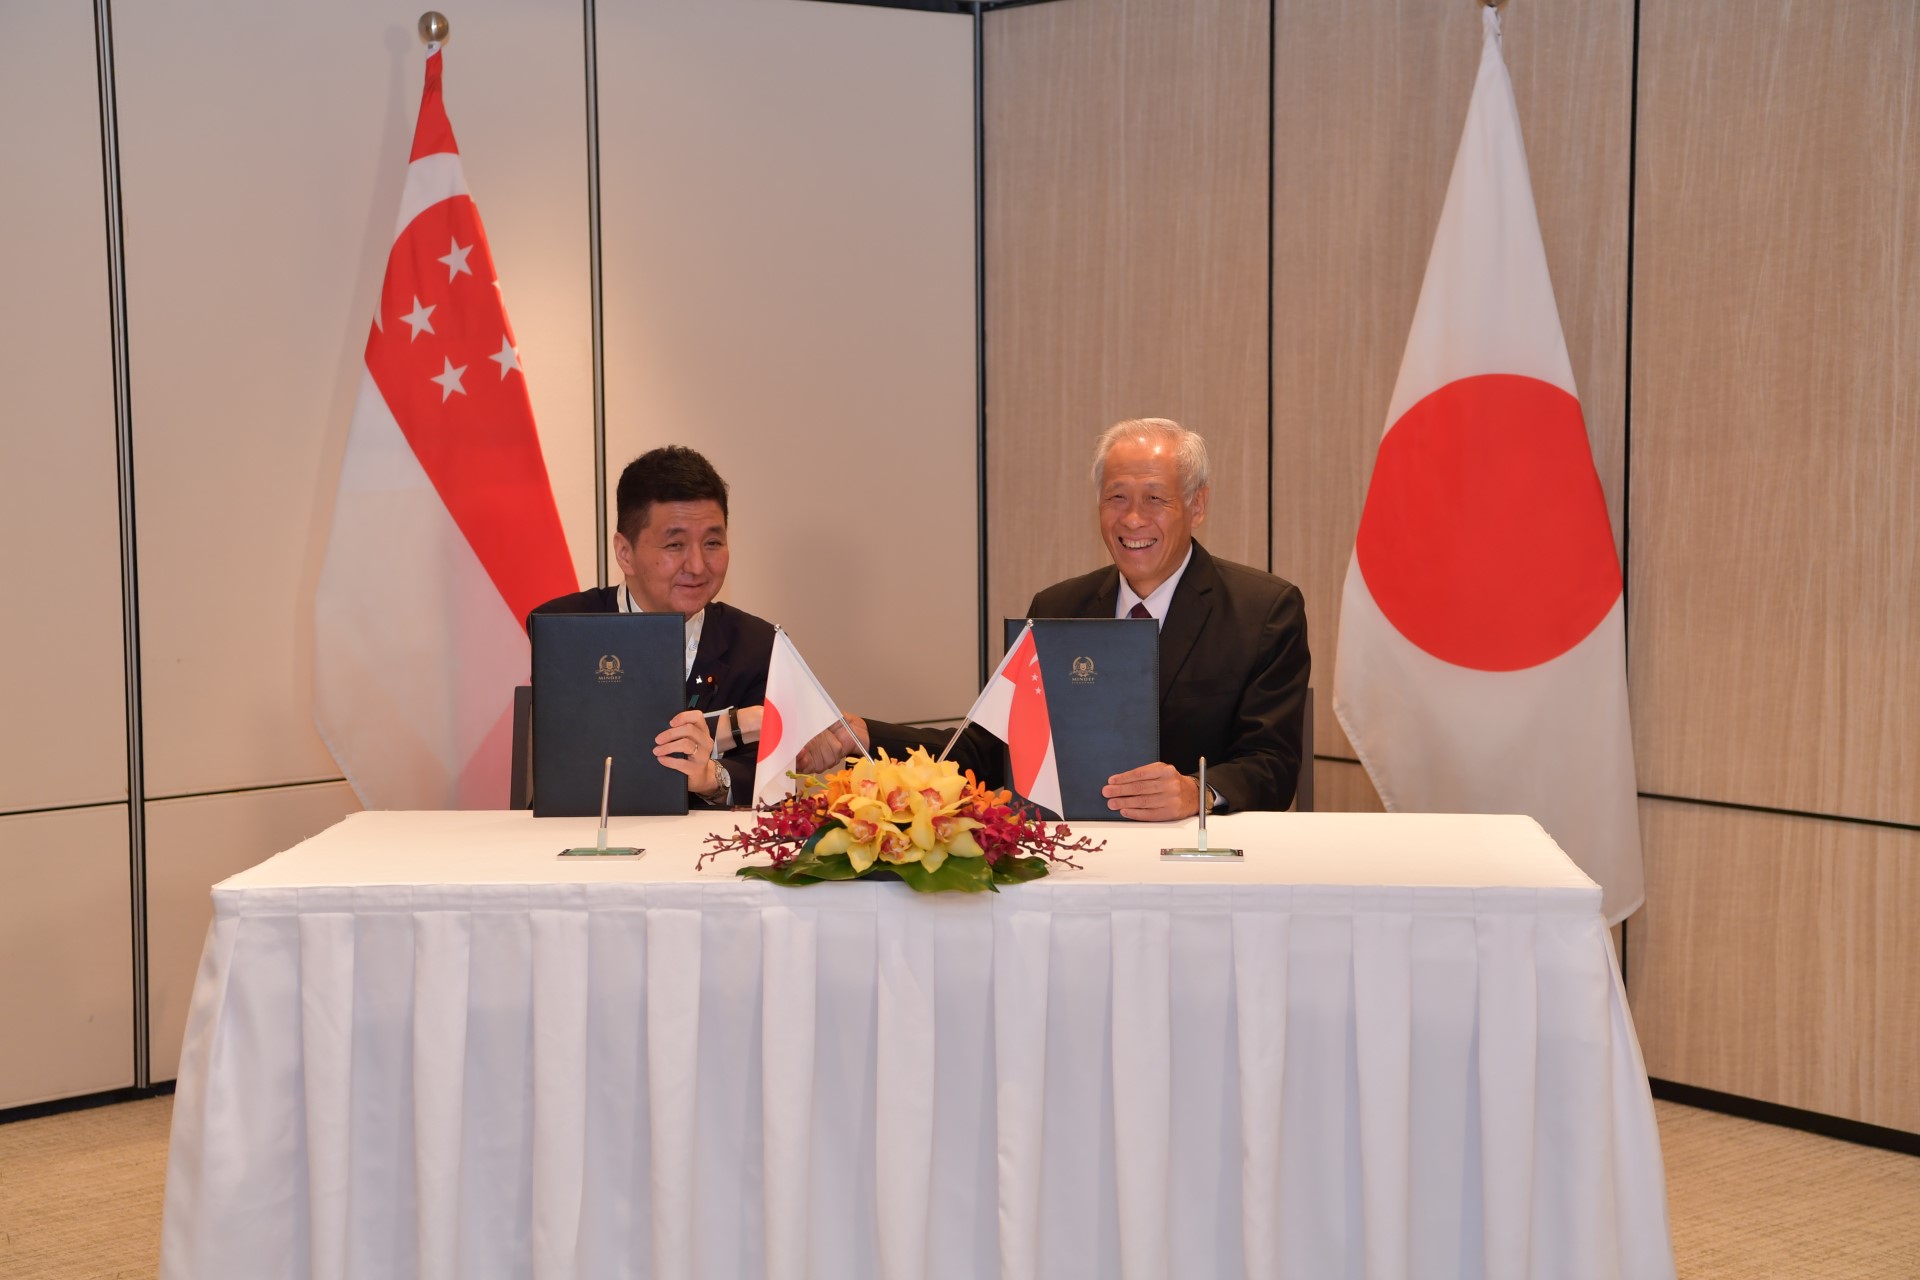 Minister for Defence Dr Ng Eng Hen (right) signing the Enhanced Memorandum on Defence Exchanges with Japan Minister of Defense Kishi Nobuo (left) this morning on the sidelines of the 19th Shangri-La Dialogue.